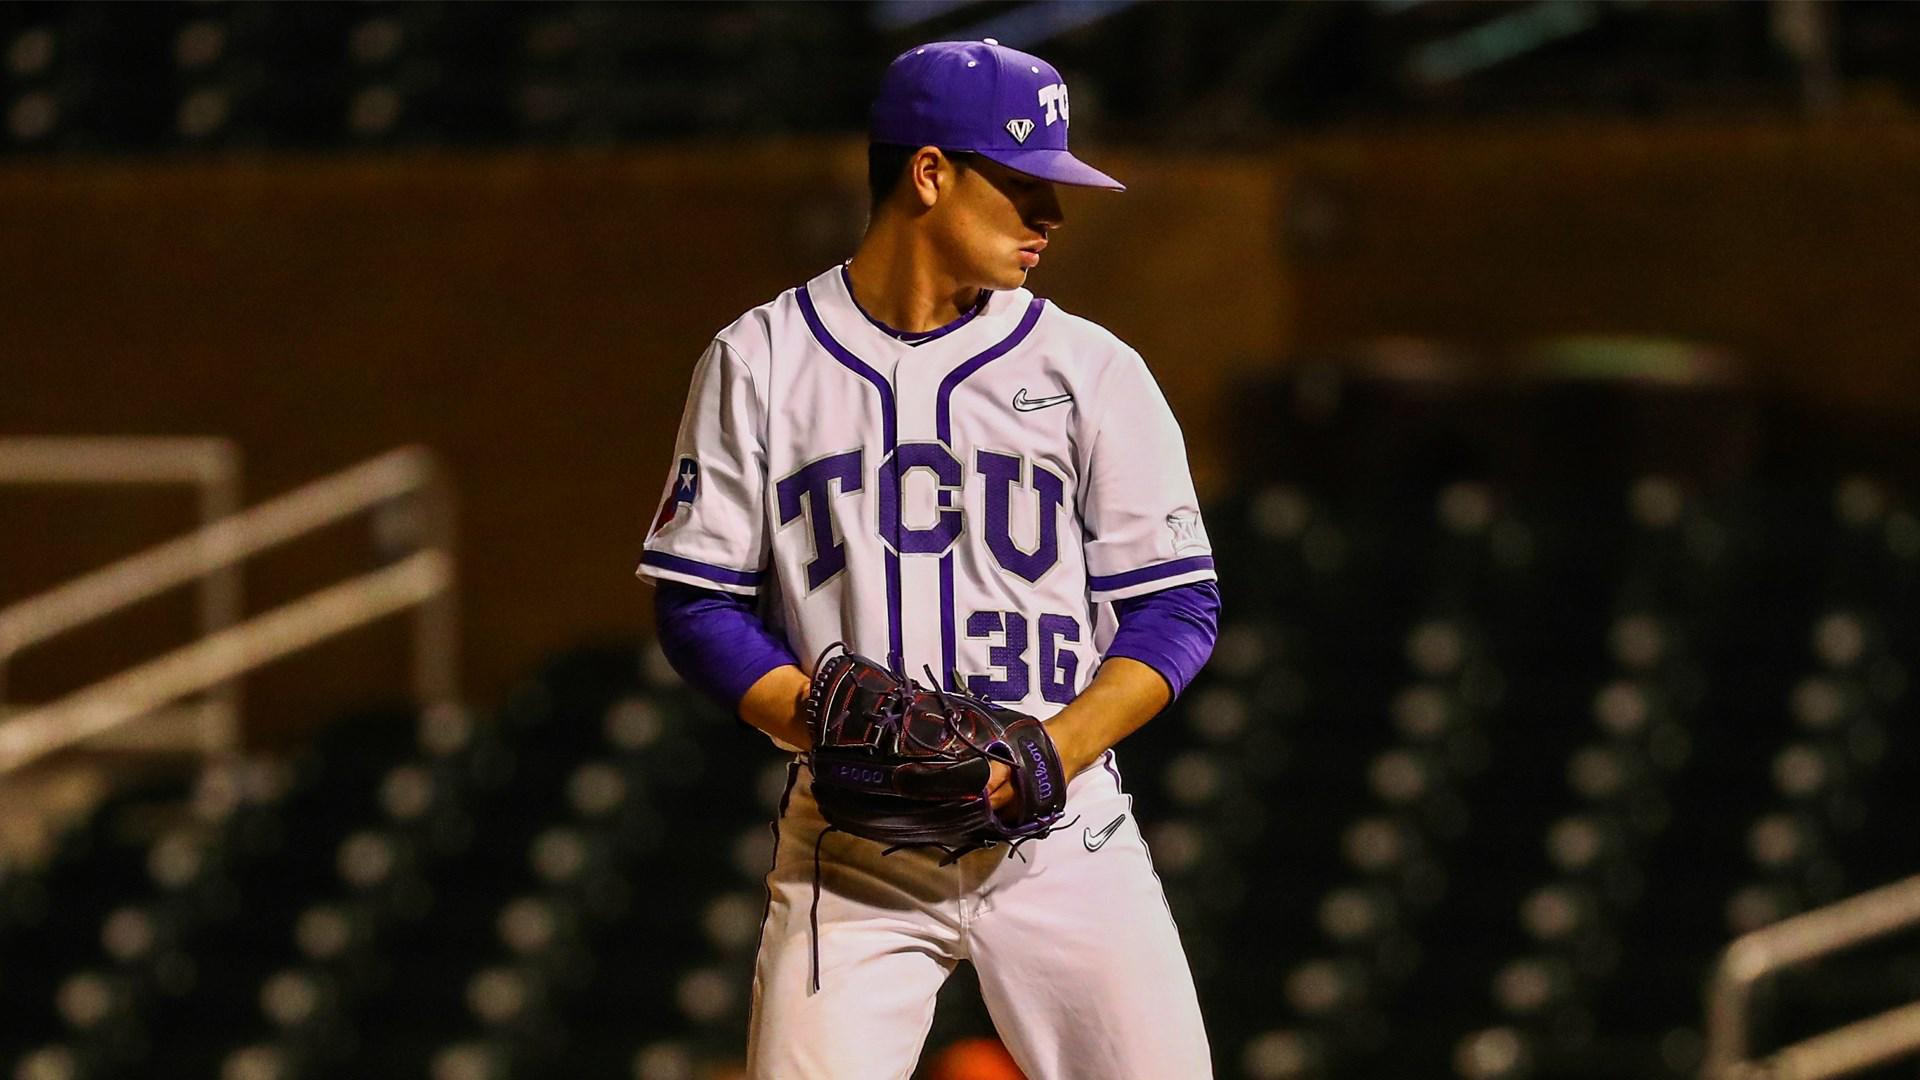 Laredo pitcher drafted by LA Angels set to return to TCU